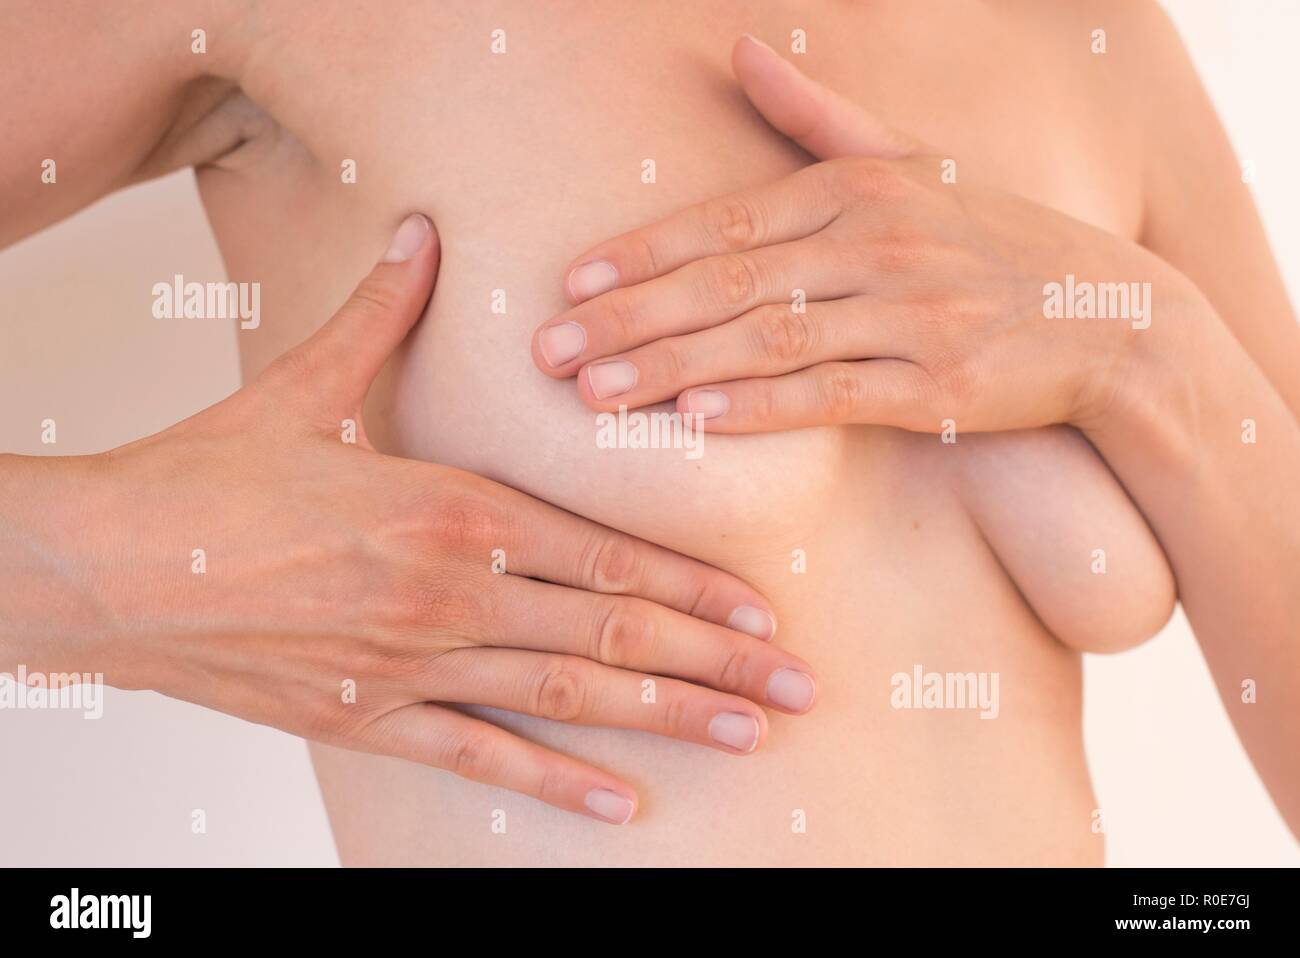 Young woman examining her breast. Stock Photo